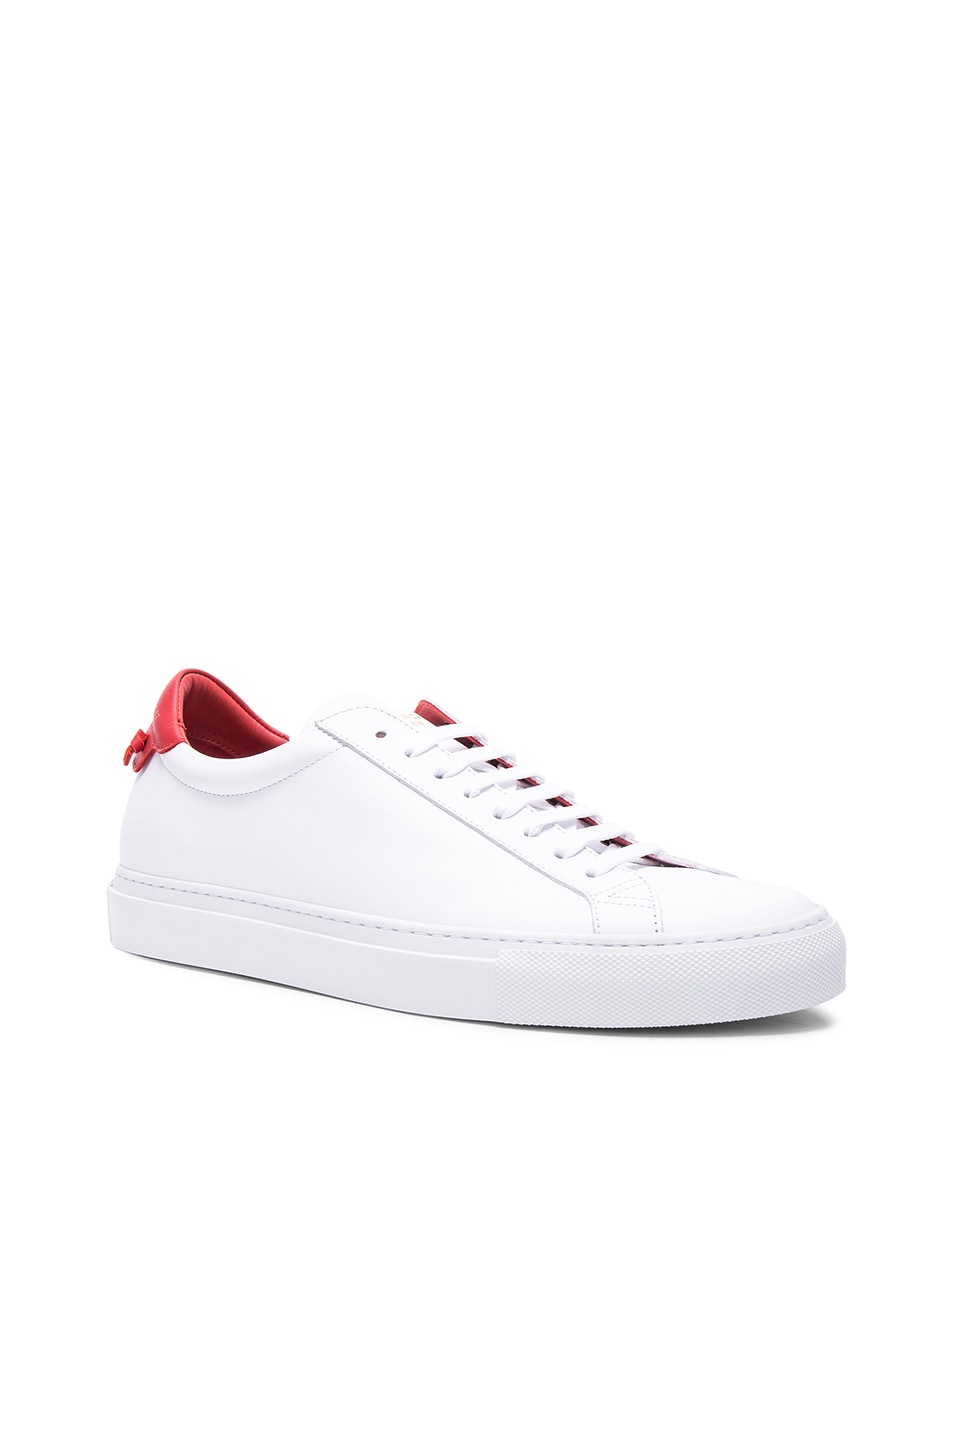 Image 1 of Givenchy Knots Leather Low Sneakers in White & Red